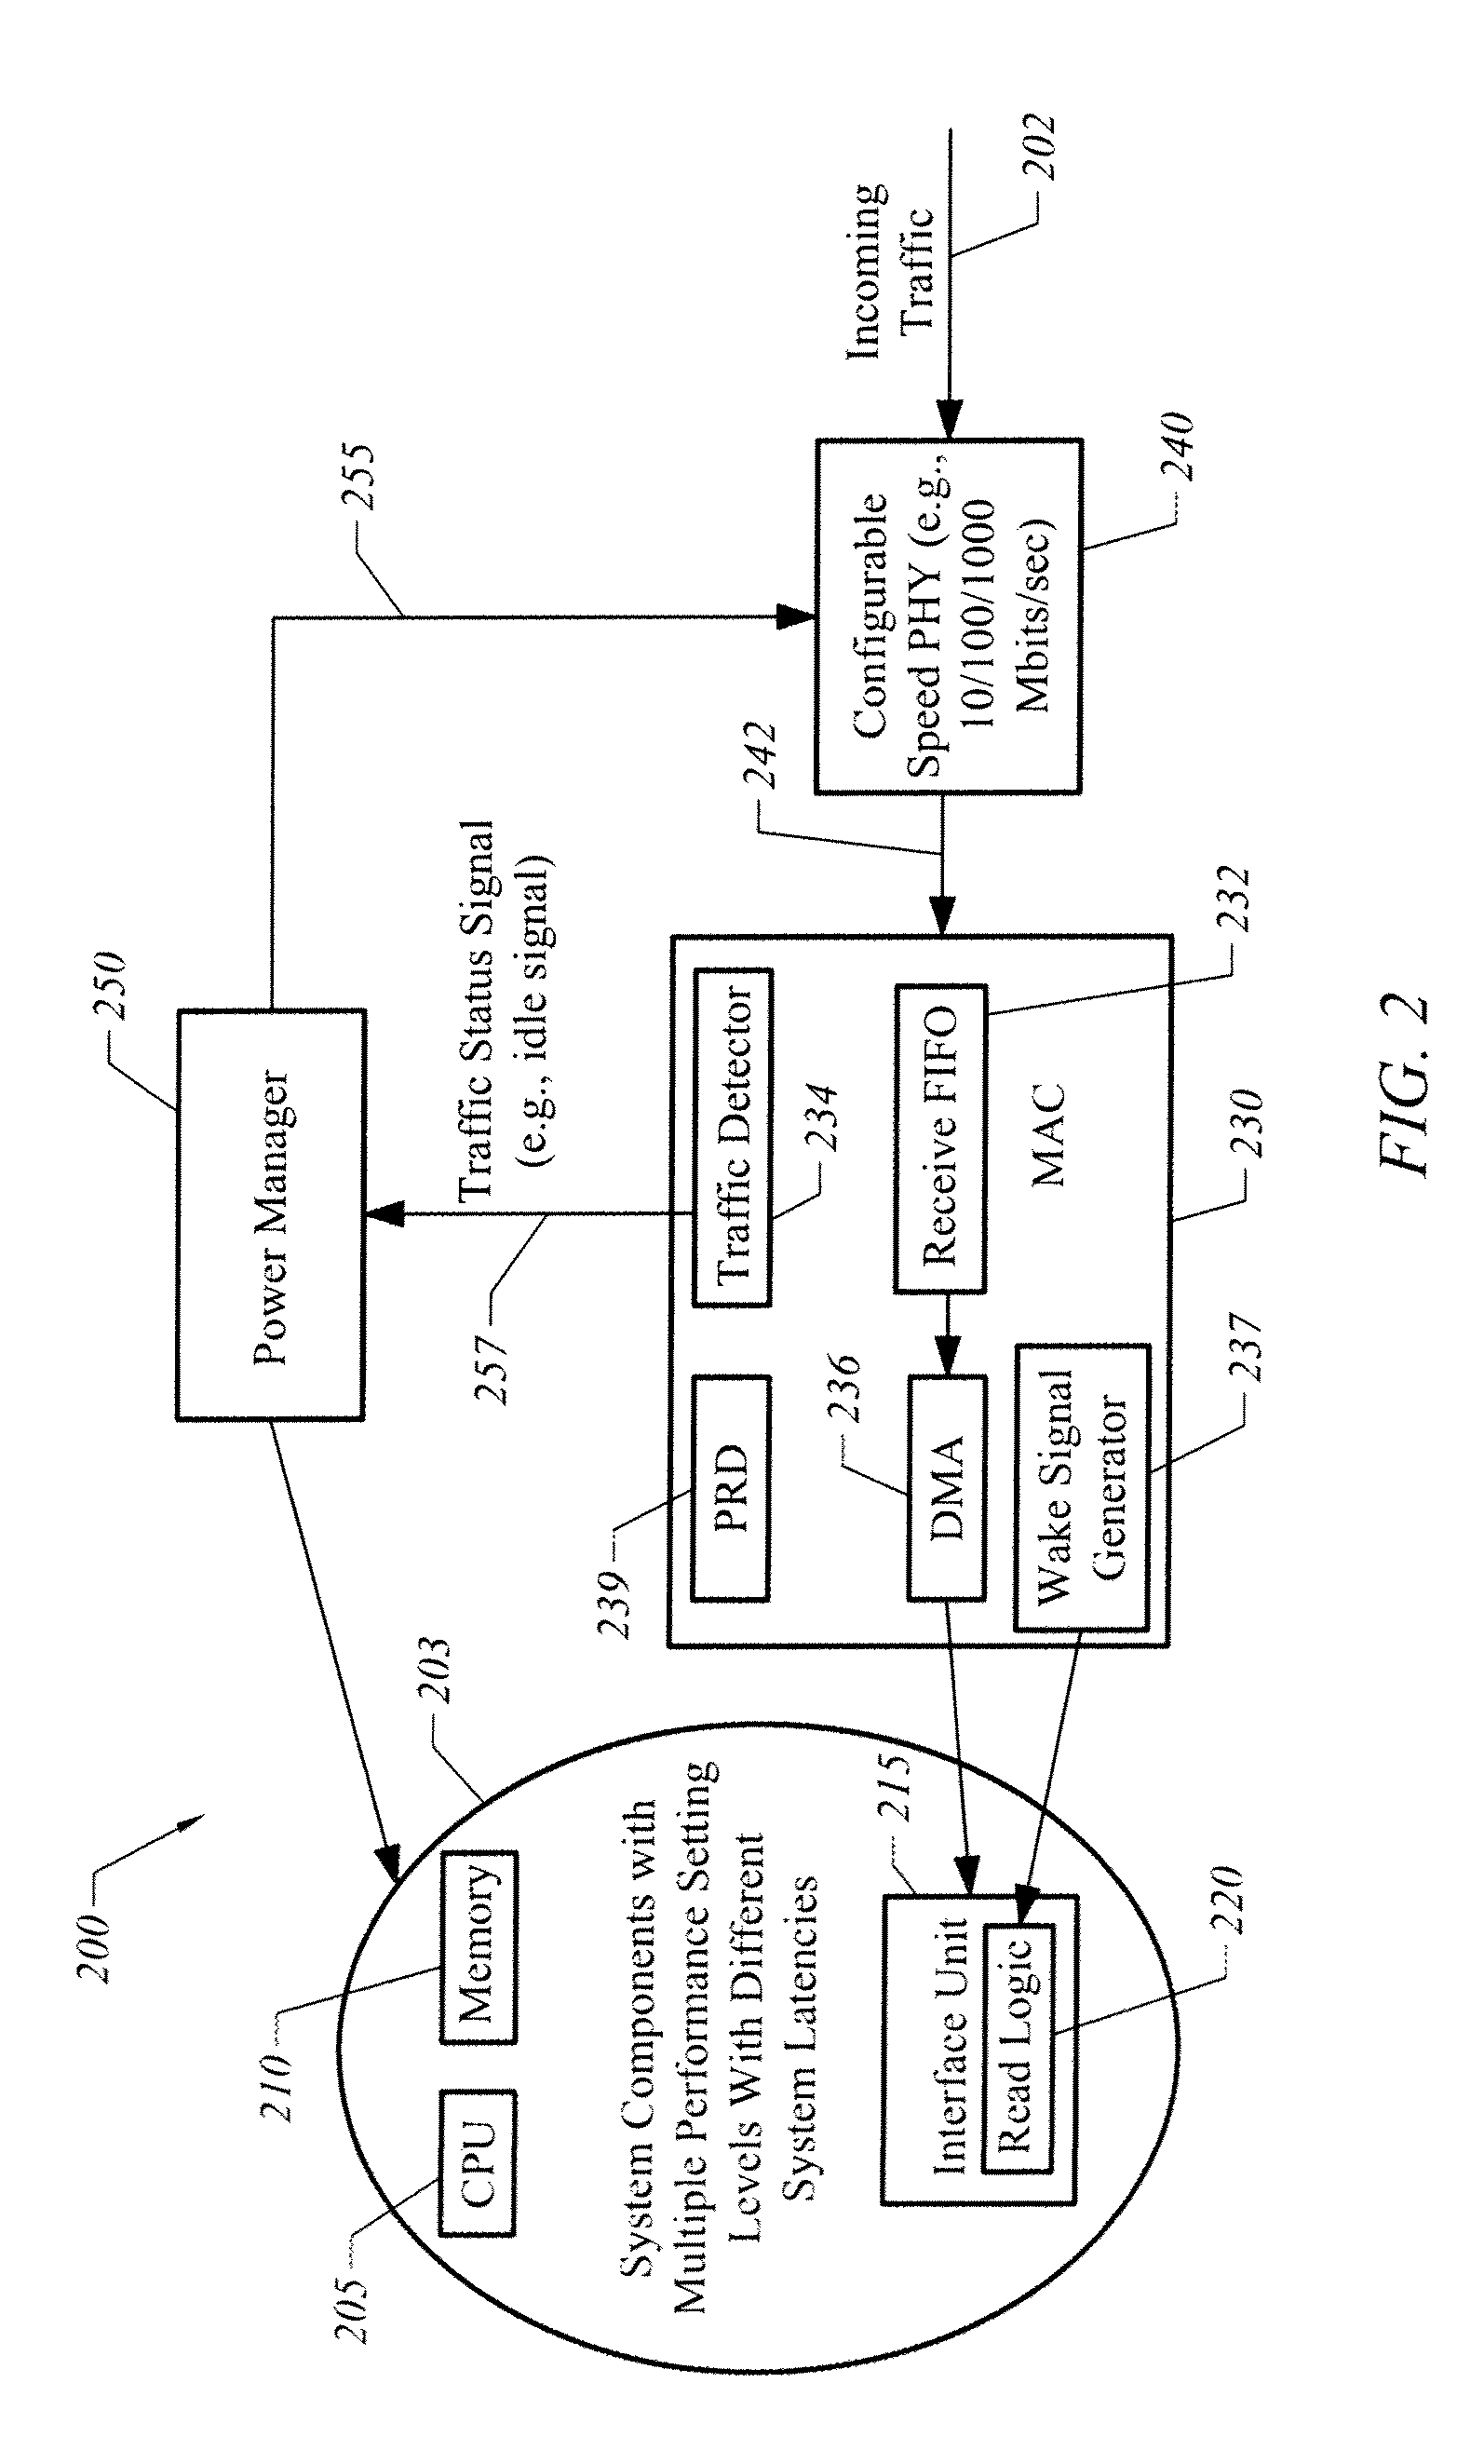 Network interface speed adjustment to accommodate high system latency in power savings mode